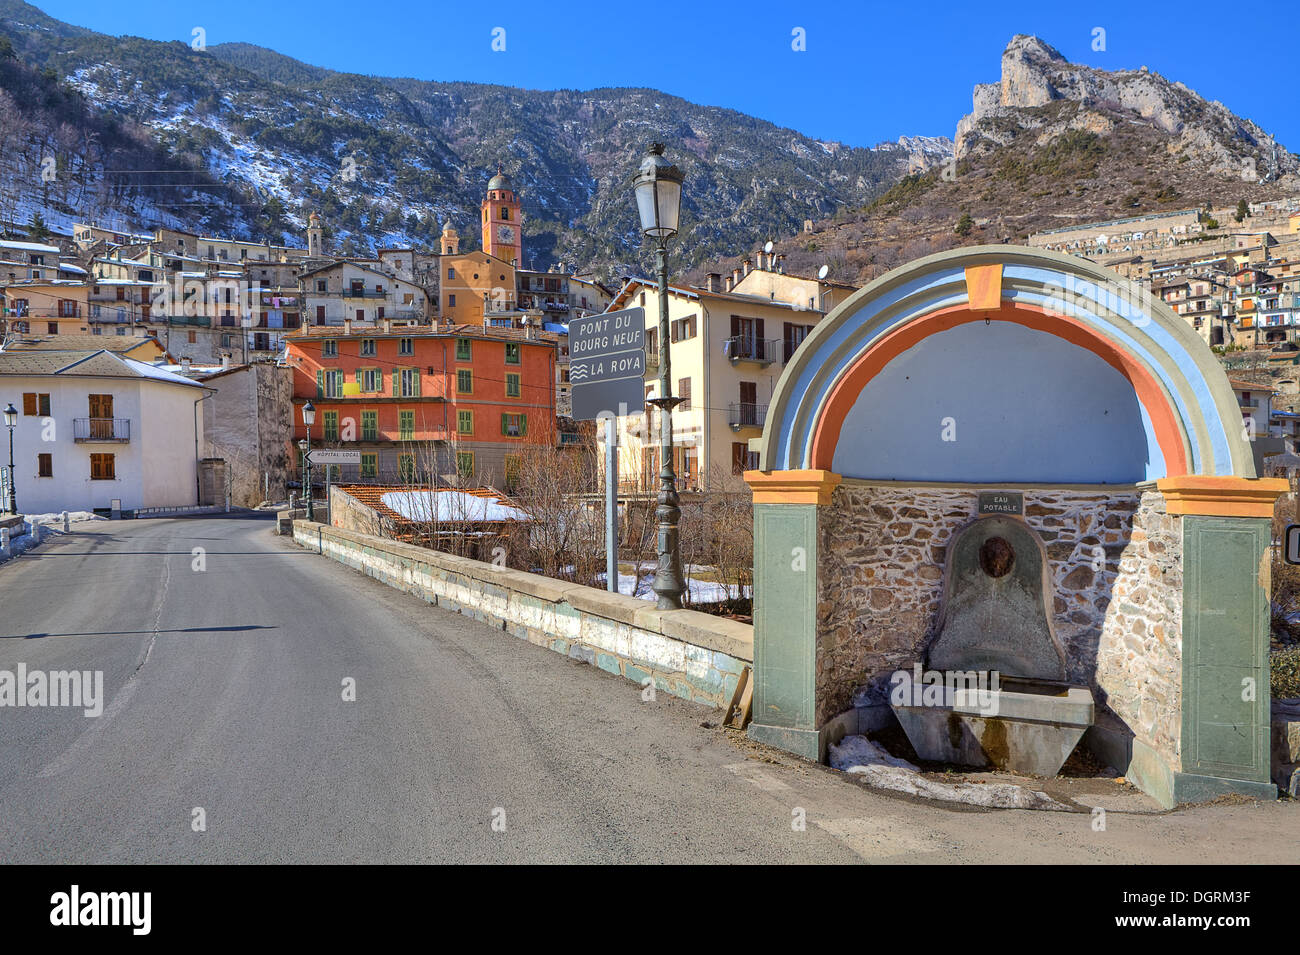 Bridge at the entrance to small french alpine town of Tende in Alps, France. Stock Photo